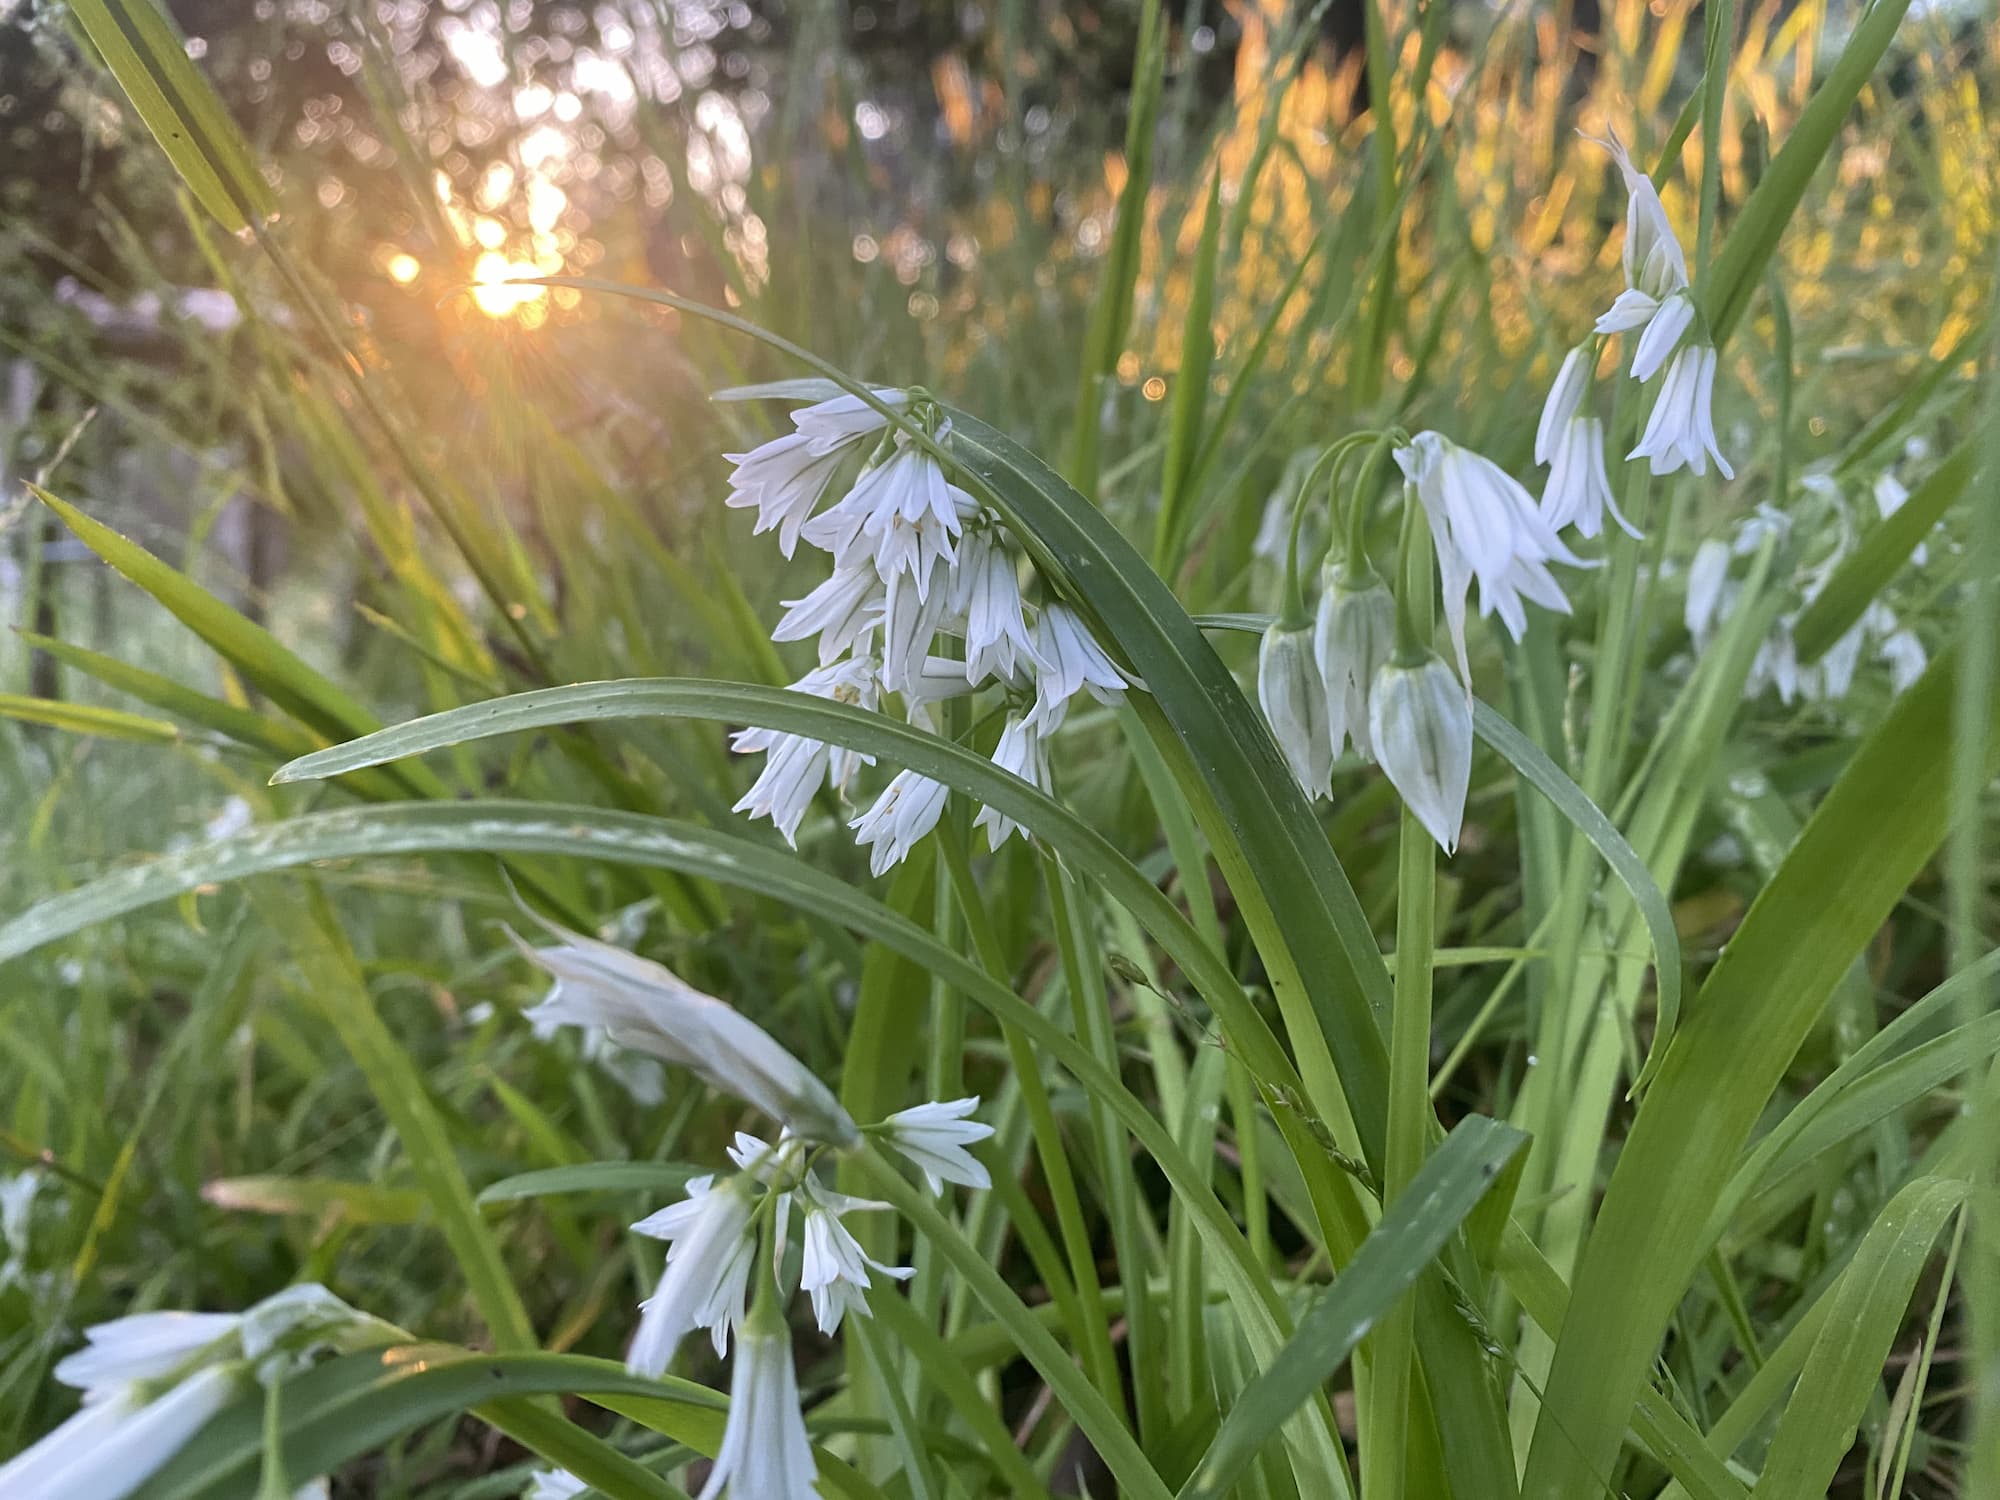 A wild patch of three-cornered leeks in bloom in the hills of Oakland, California.